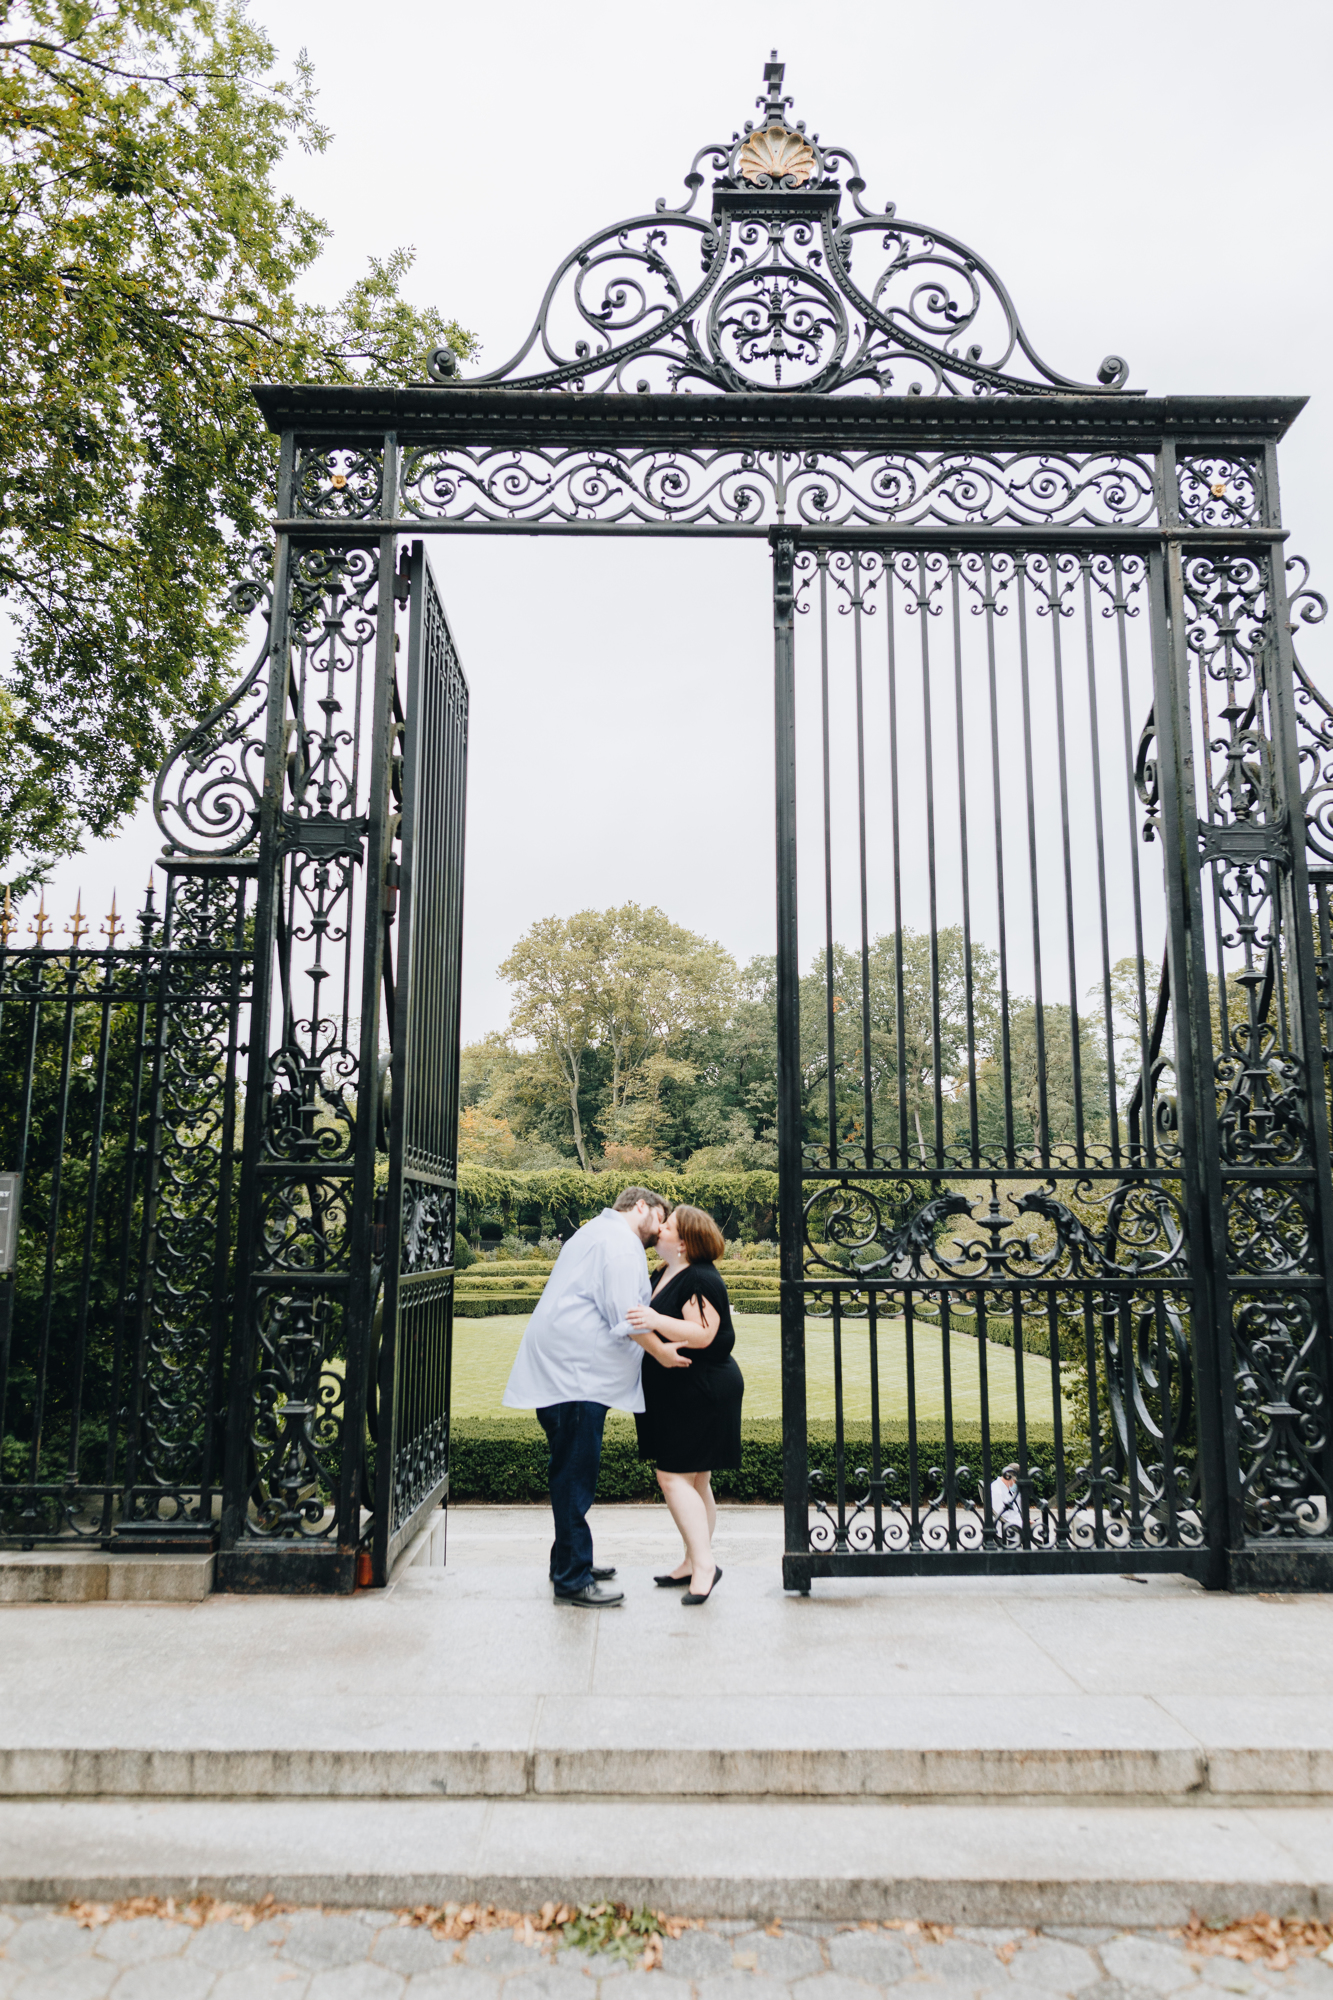 Lovely Autumn Conservatory Garden Engagement Photography